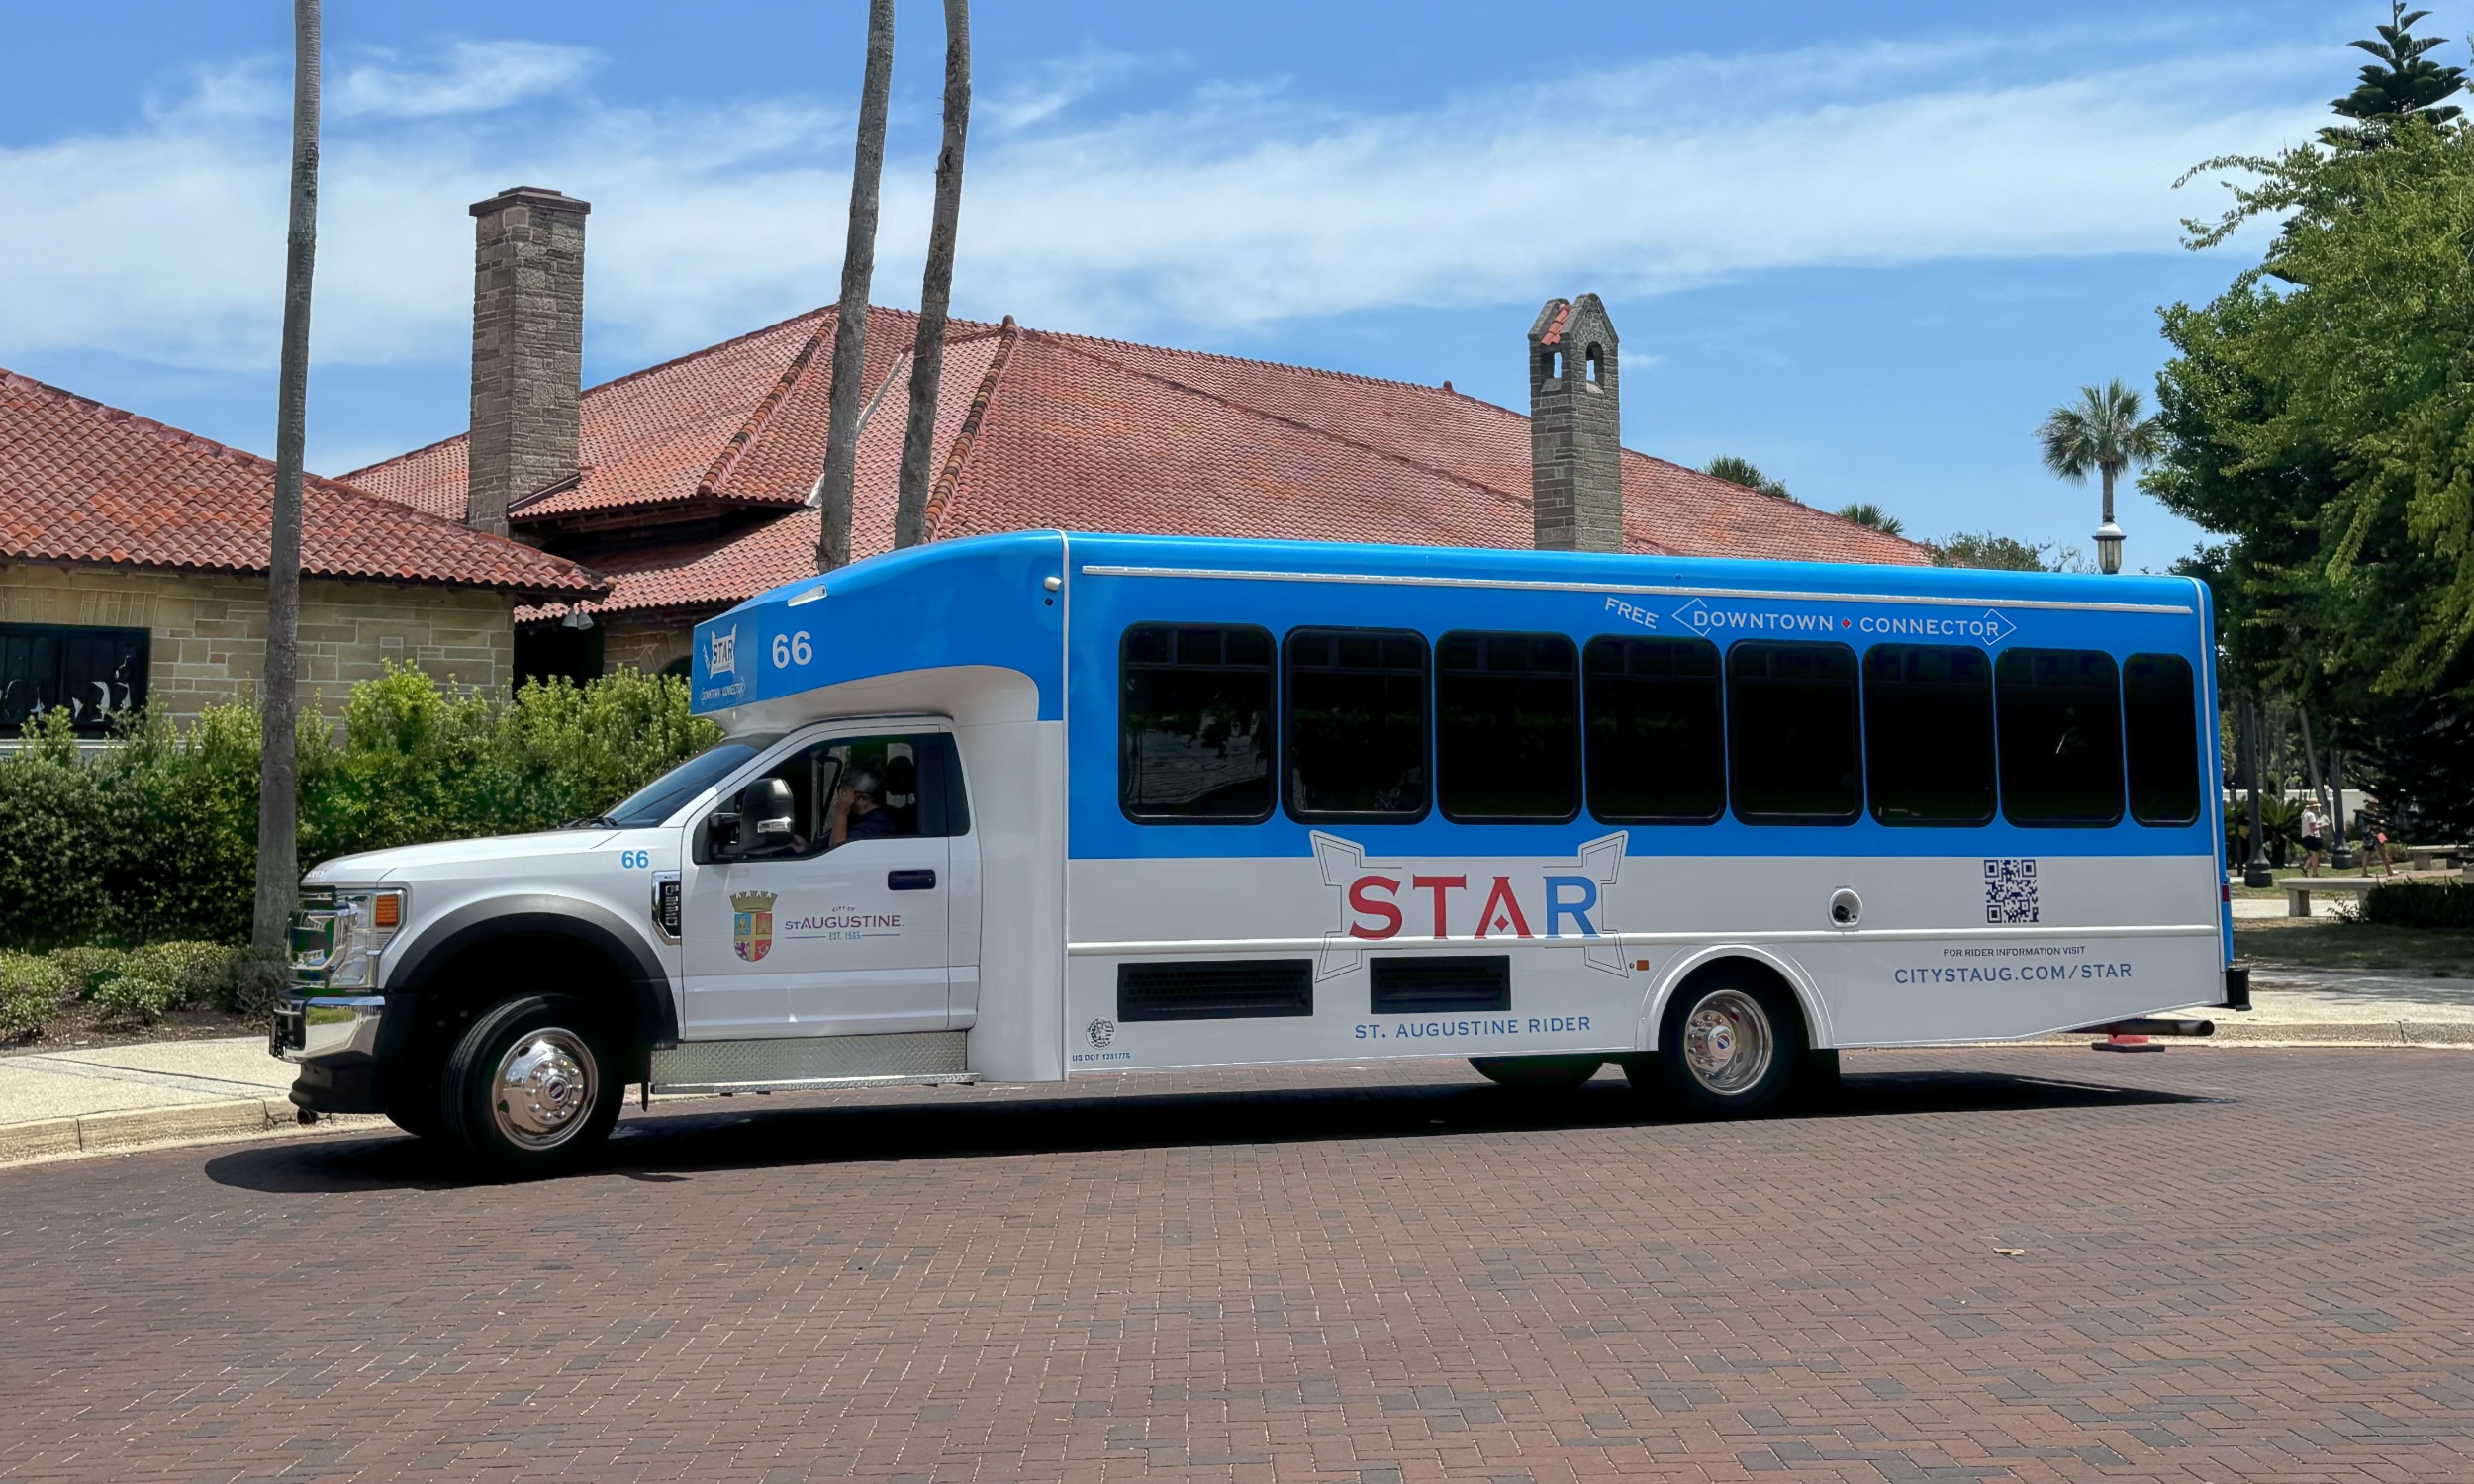 The STAR Circulator bus parked near the Visitors and Information Center